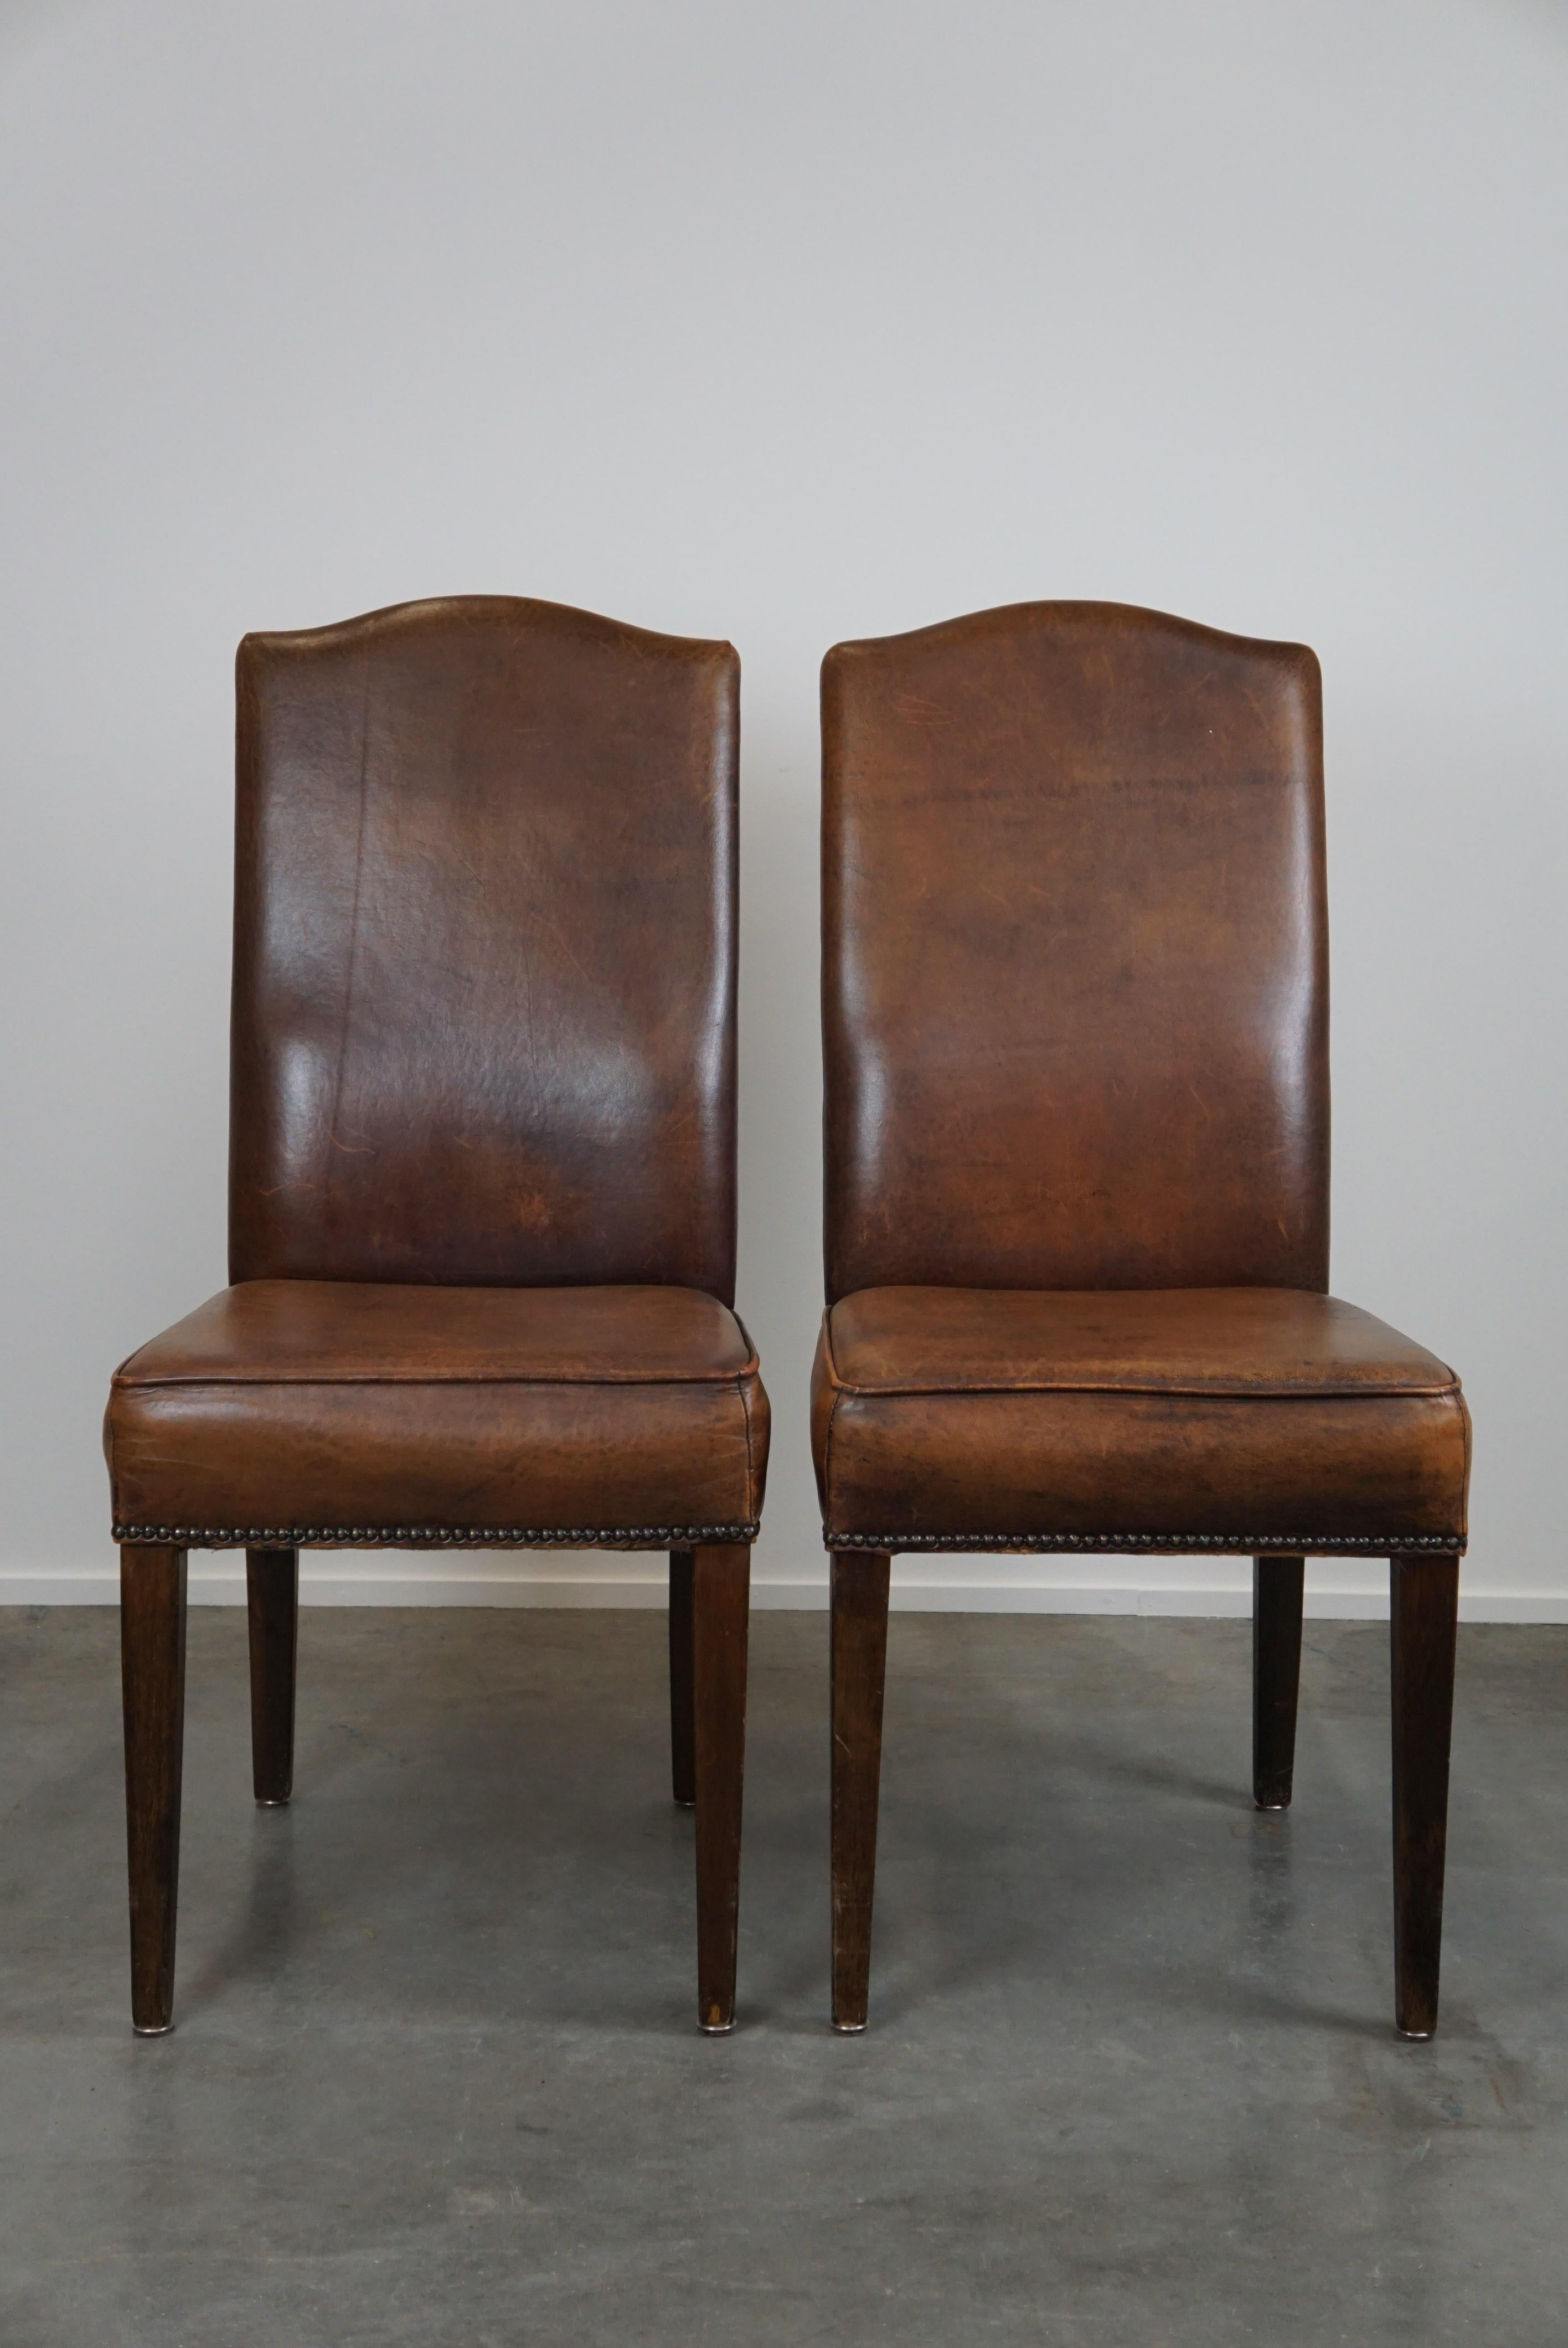 Offered is this beautiful set of four cognac-colored sheep leather dining chairs with a beautiful patina. Through responsible use, this beautiful set of sheep leather dining chairs has acquired a lovely patina, making them even more attractive.